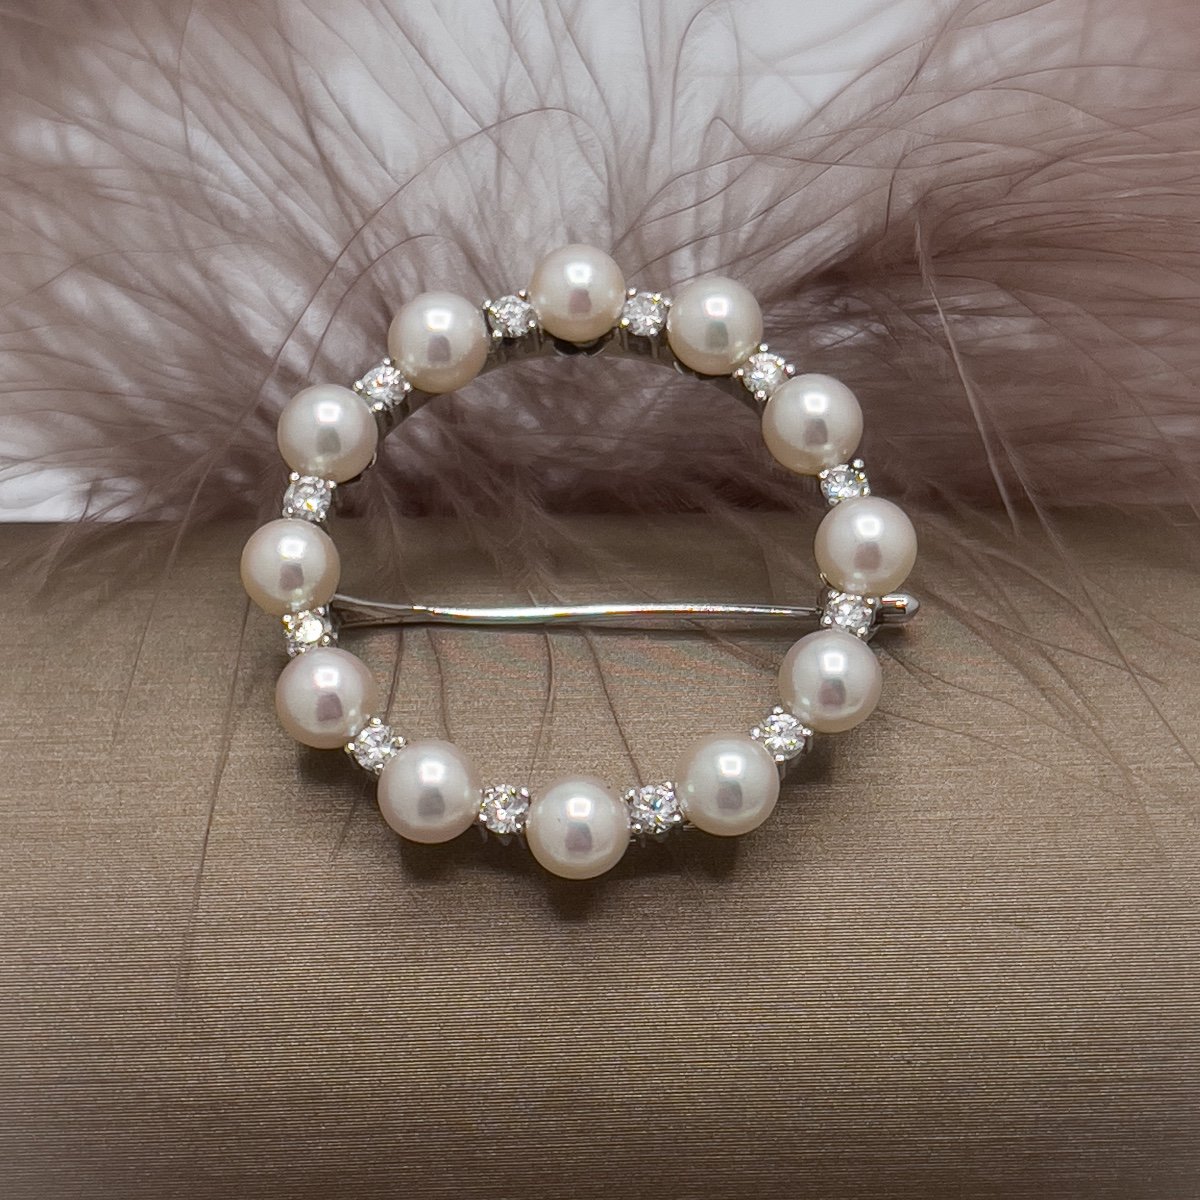 White Gold Round Brooch Set With Diamonds And Cultured Pearls